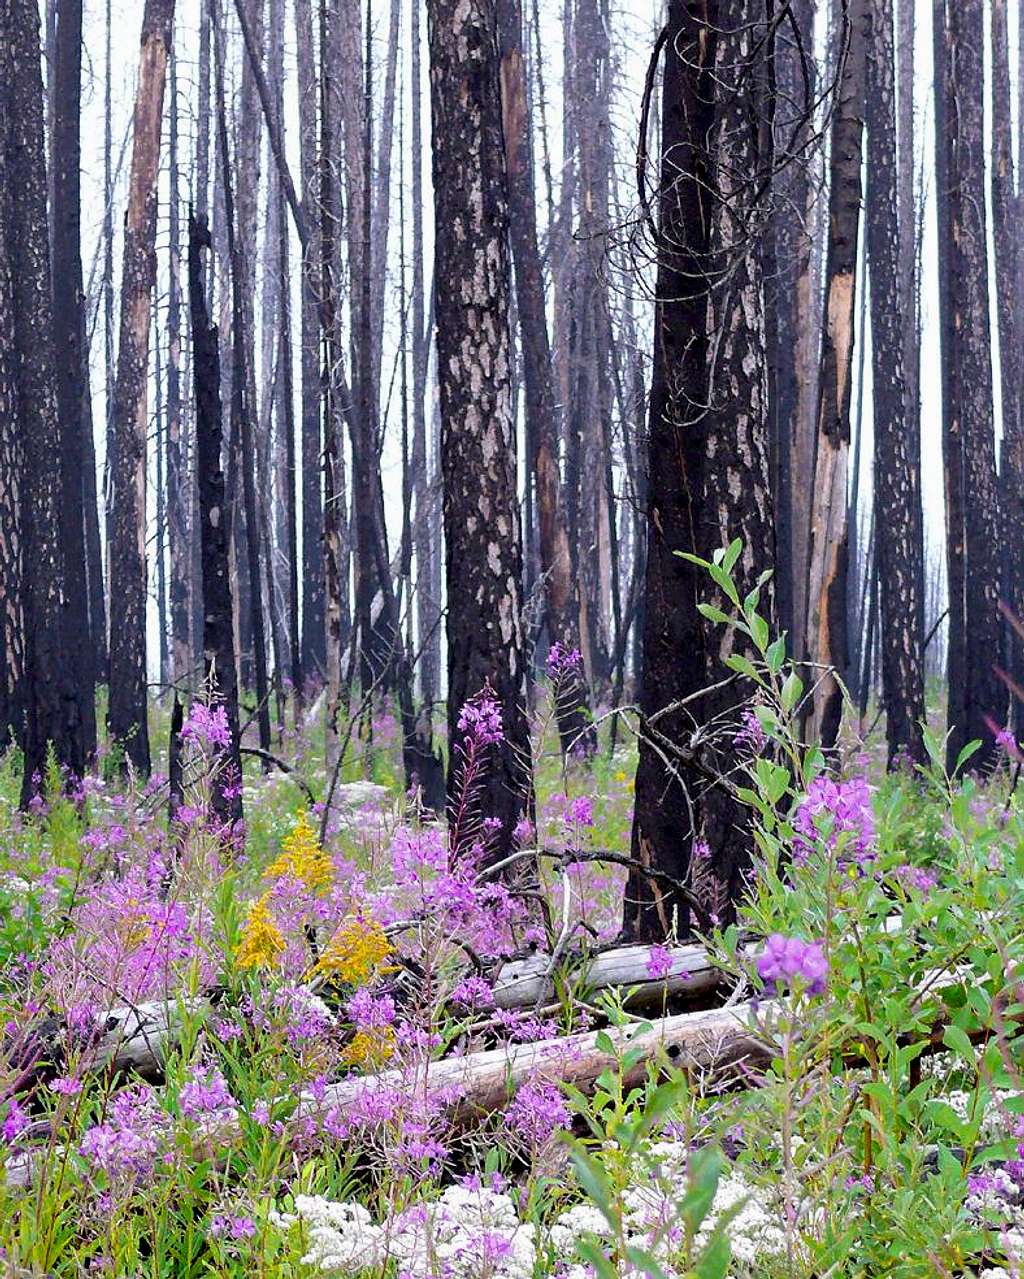 fire, then fireweed